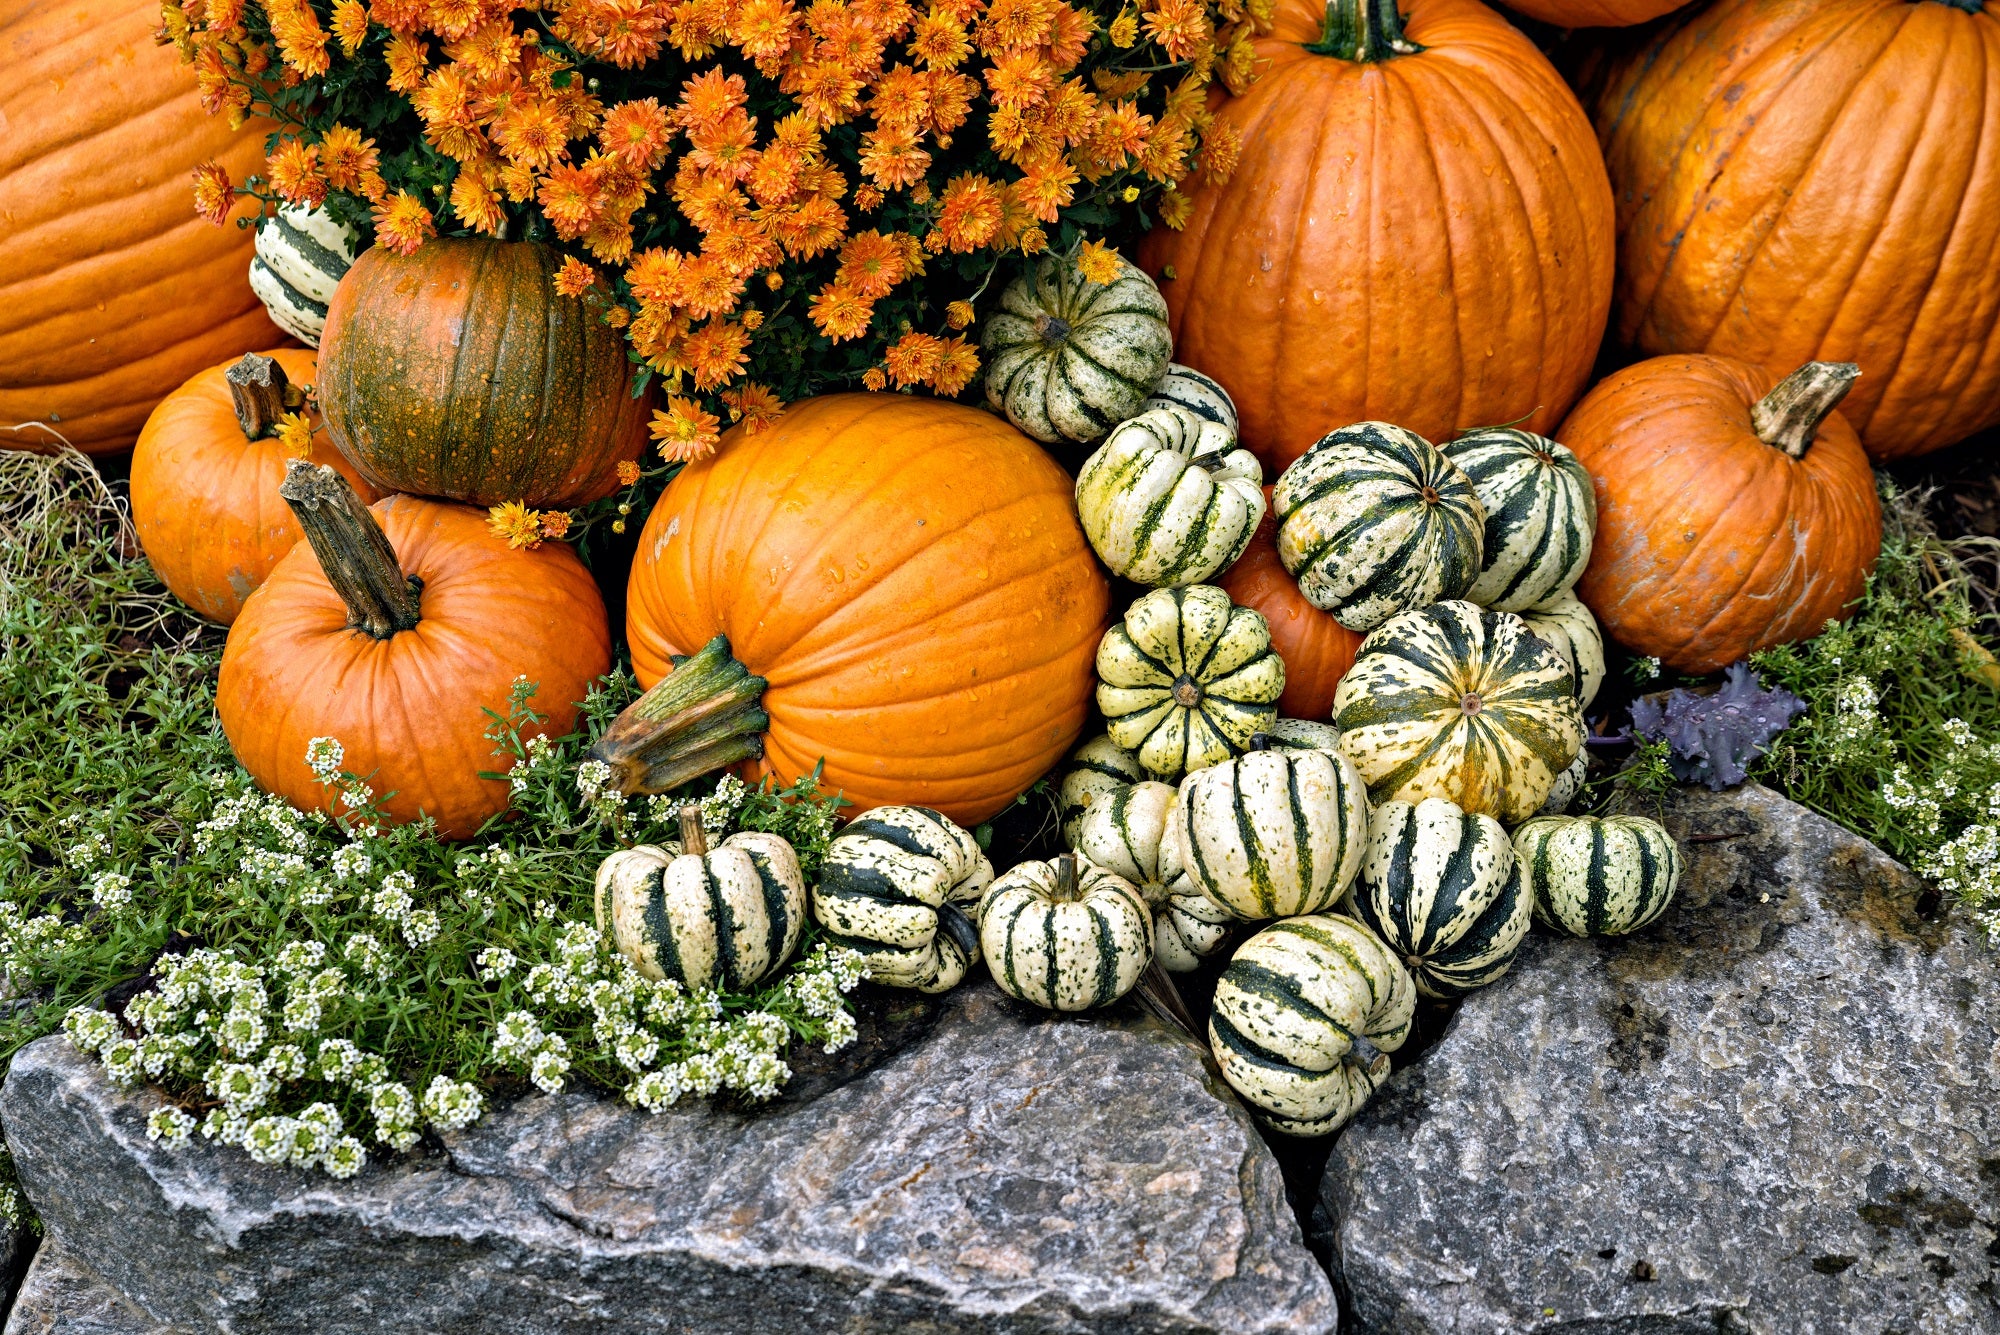 Oh my gourd! It's fall!